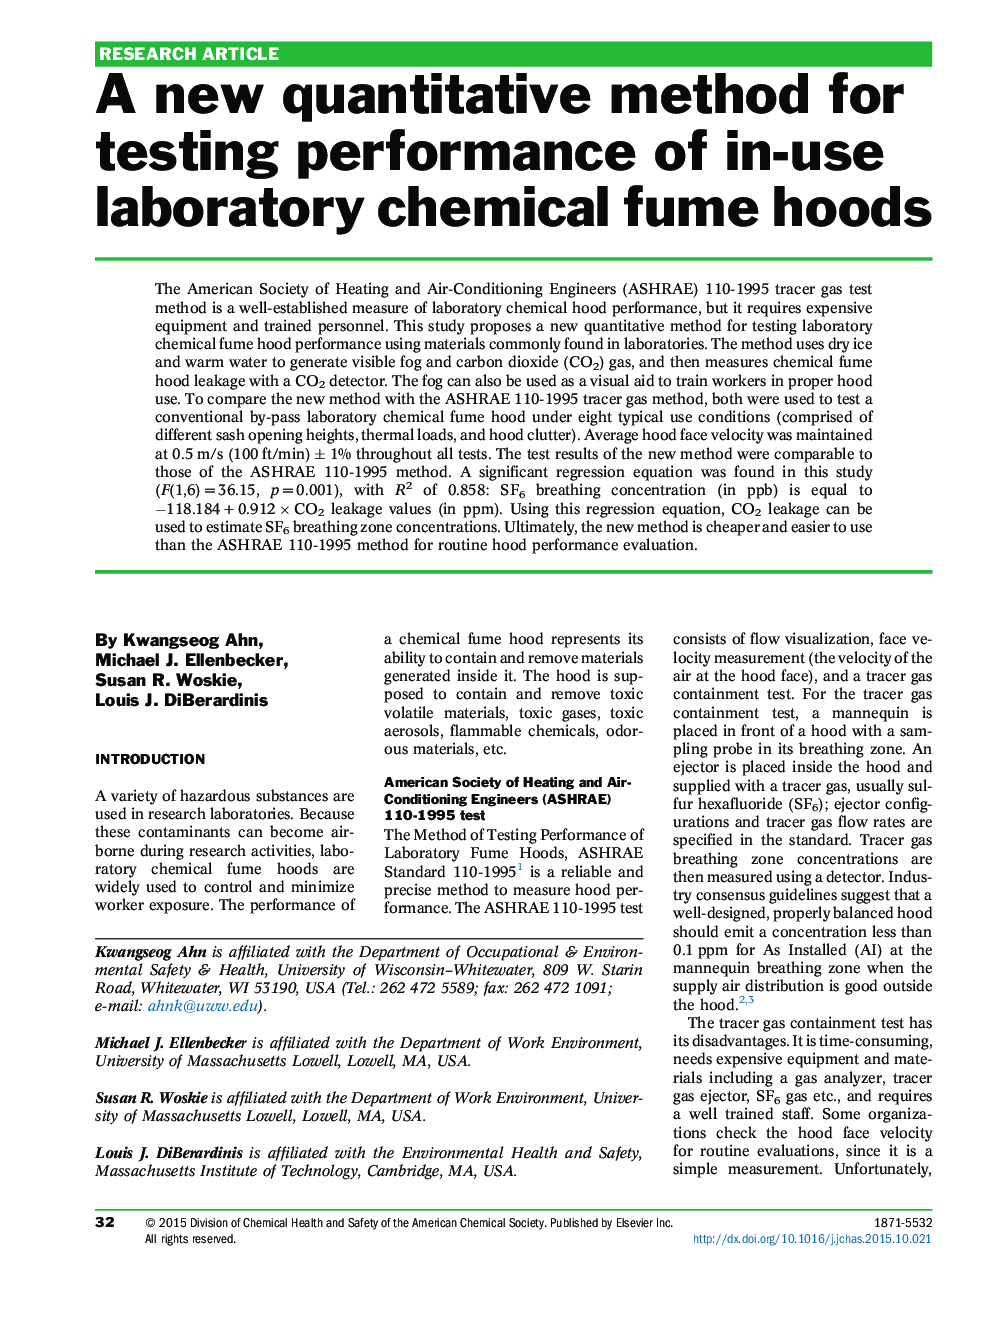 A new quantitative method for testing performance of in-use laboratory chemical fume hoods